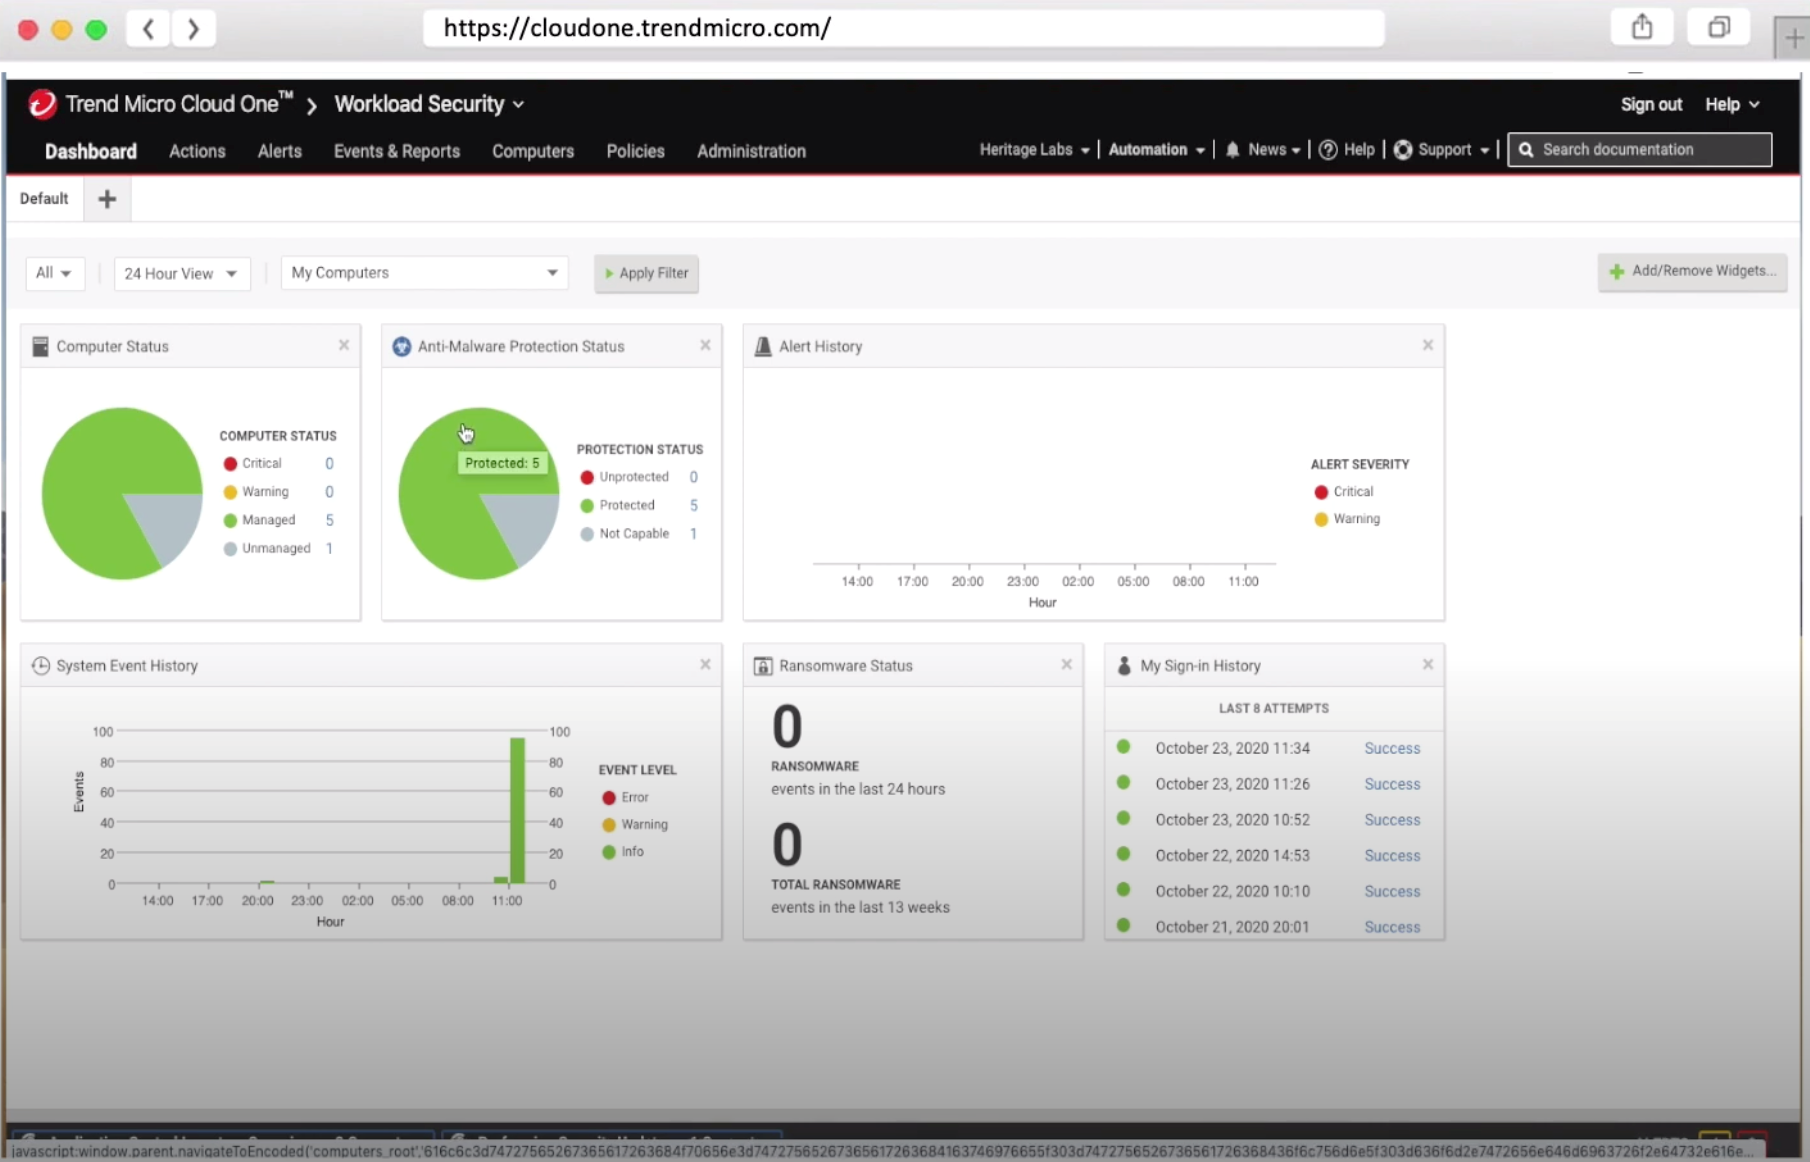 Trend Micro Cloud One Software - Trend Micro Cloud One dashboard